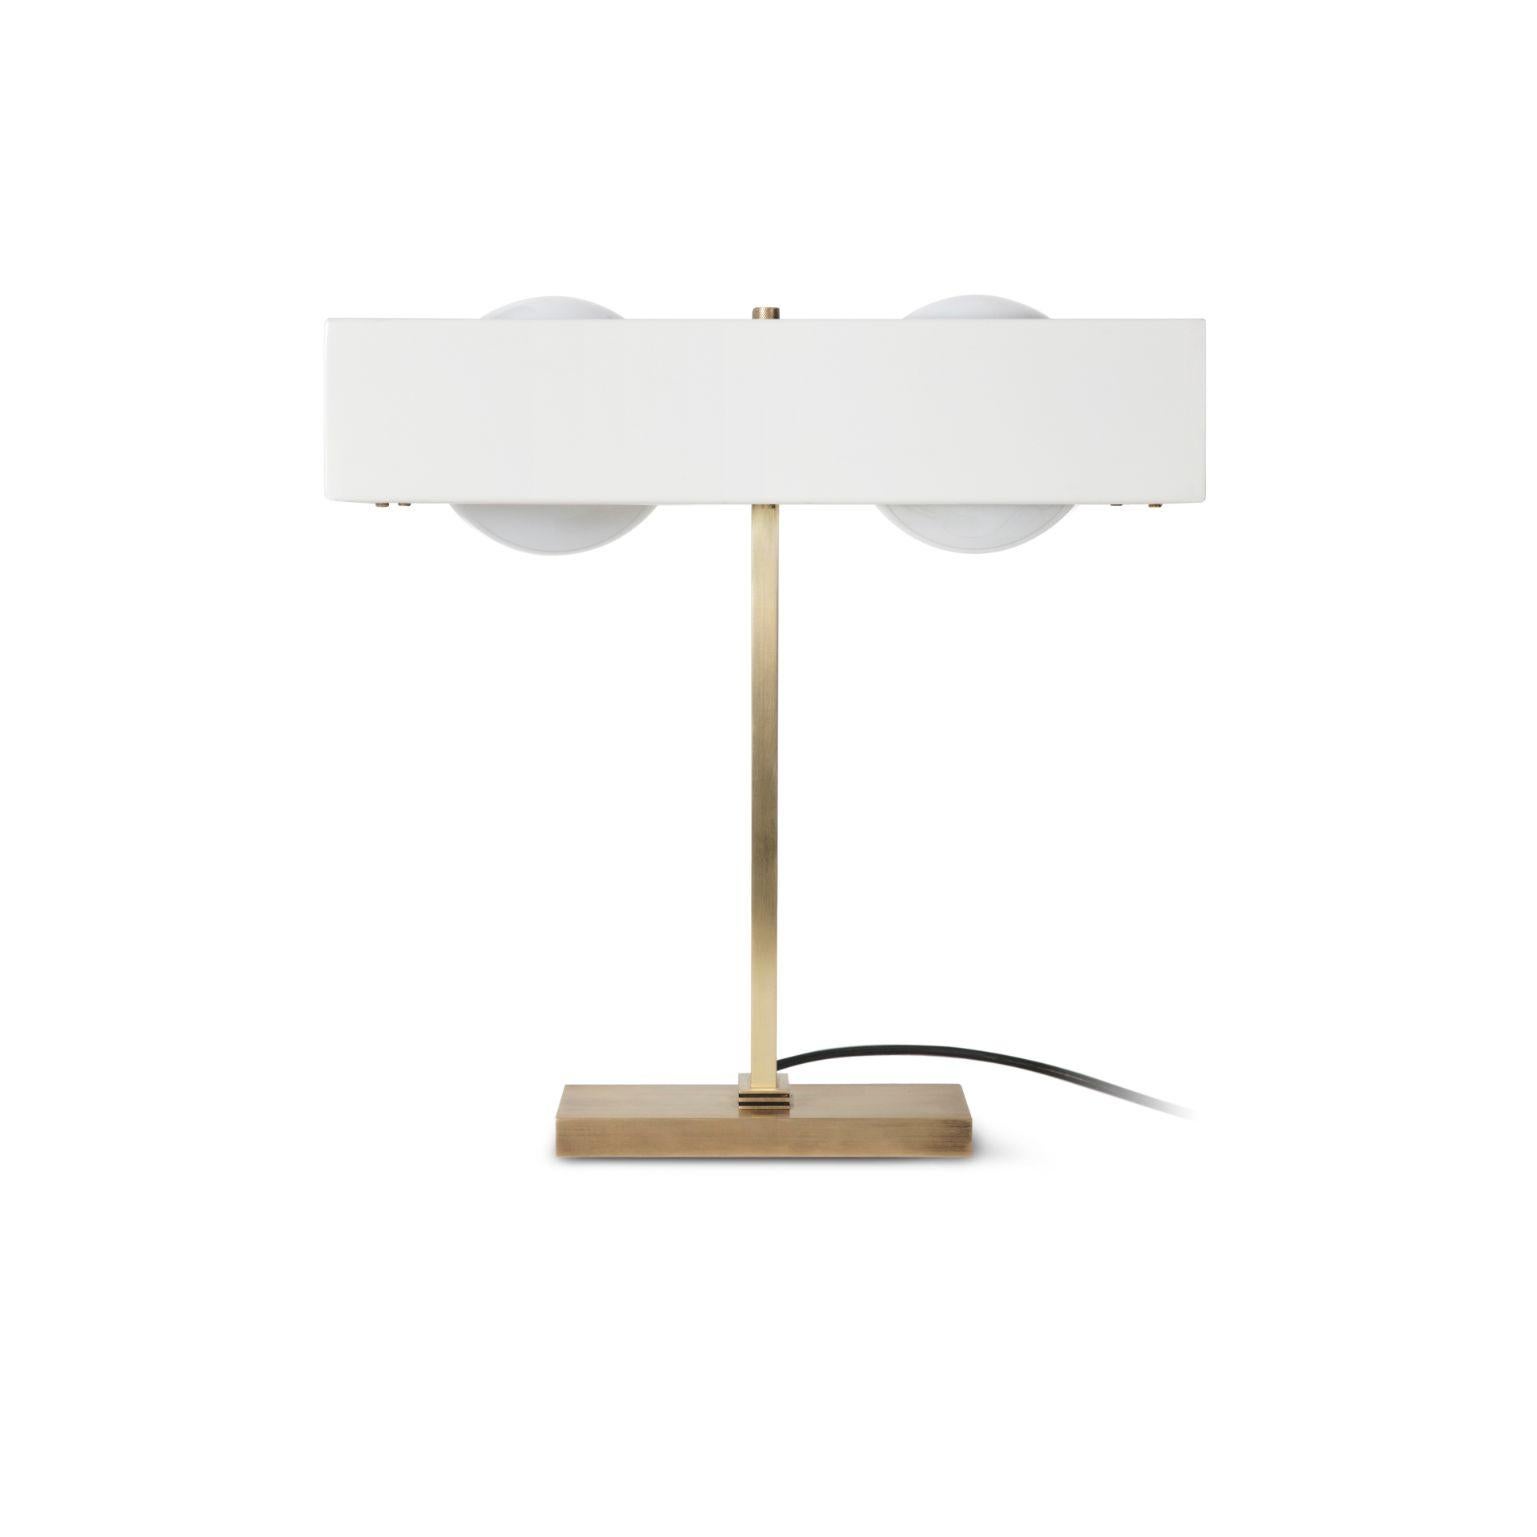 Kernel table light - White by Bert Frank
Dimensions: 41.5 x 40 x 24 cm
Materials: Brass, Steel

Brushed brass lacquered as standard, custom finishes available.

When Adam Yeats and Robbie Llewellyn founded Bert Frank in 2013 it was a meeting of